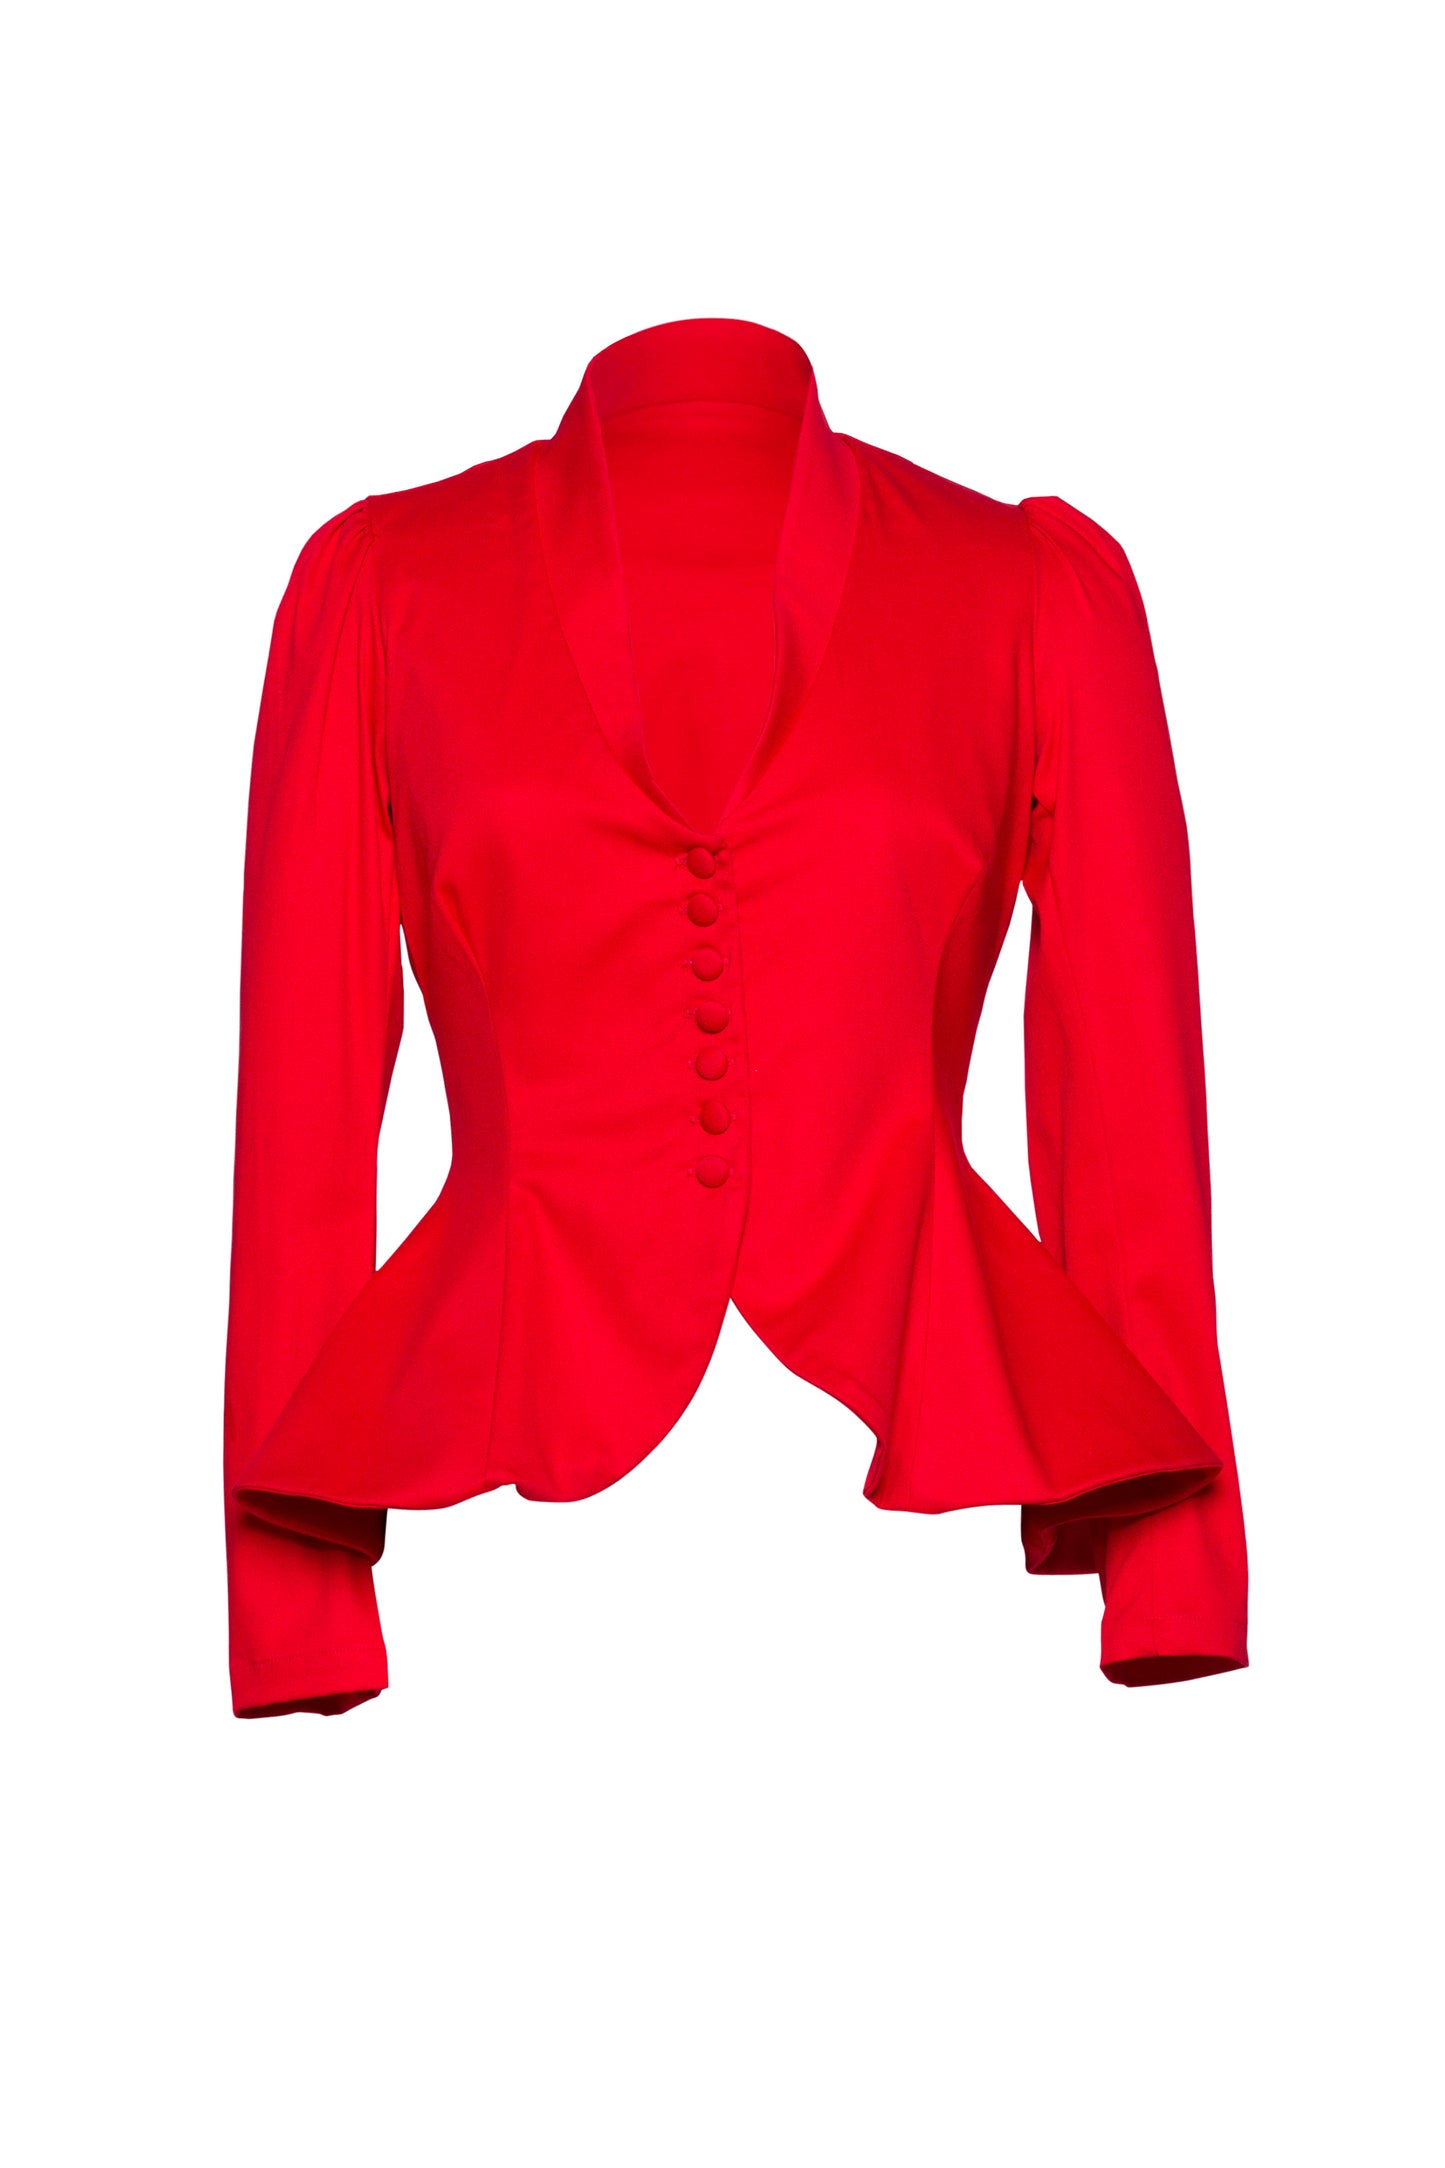 Morgana Jacket in Red Twill | Laura Byrnes Design